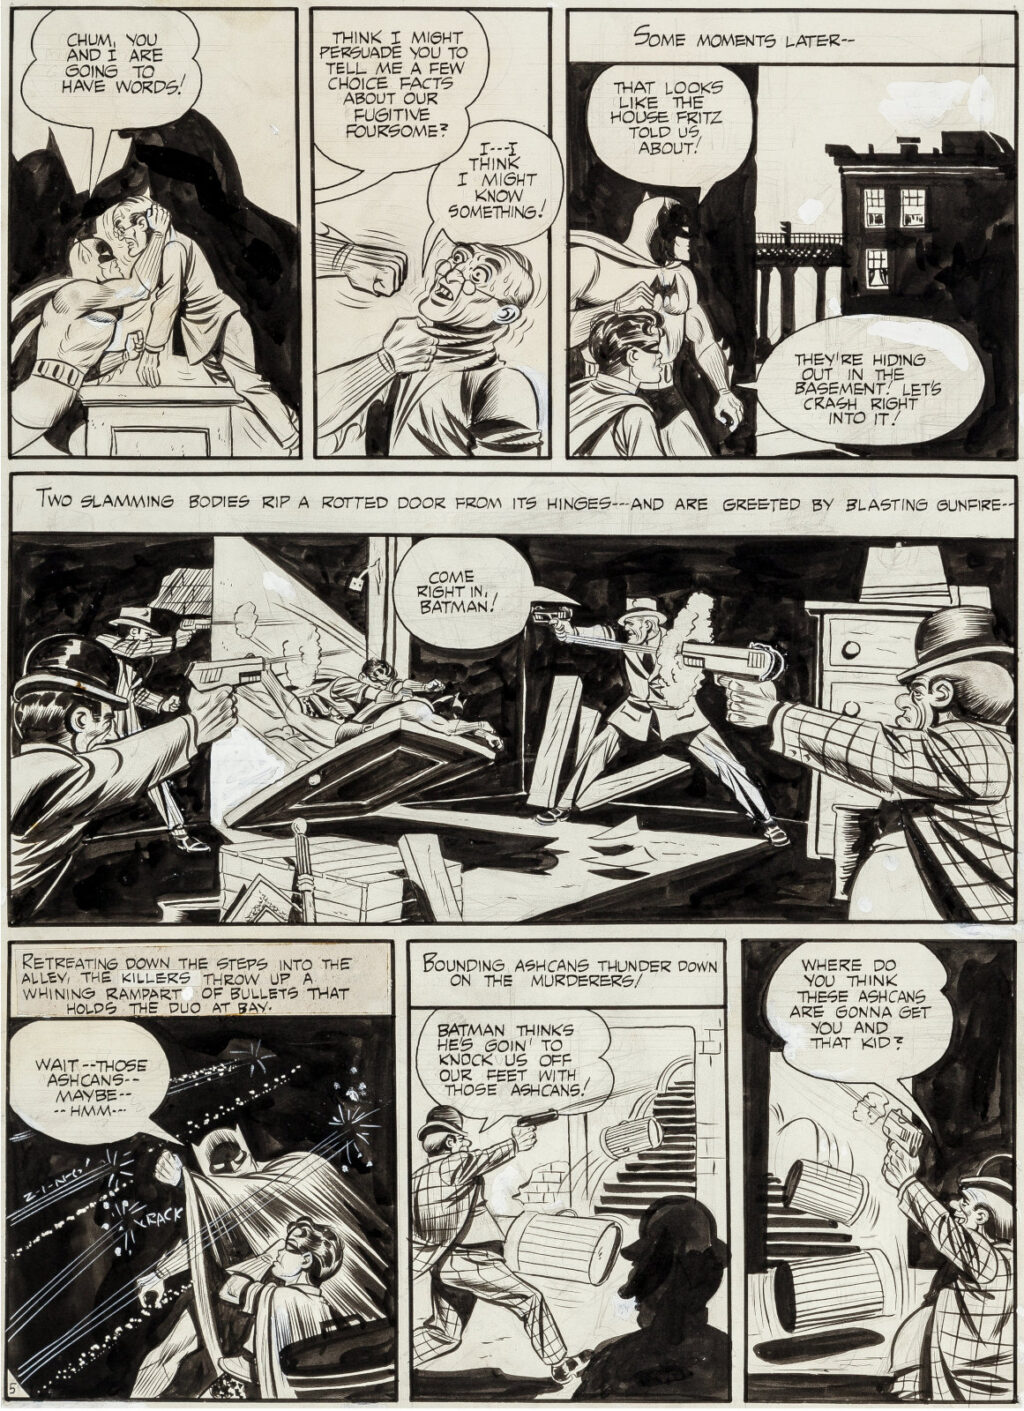 Batman issue 9 page 5 by Jerry Robinson and George Roussos